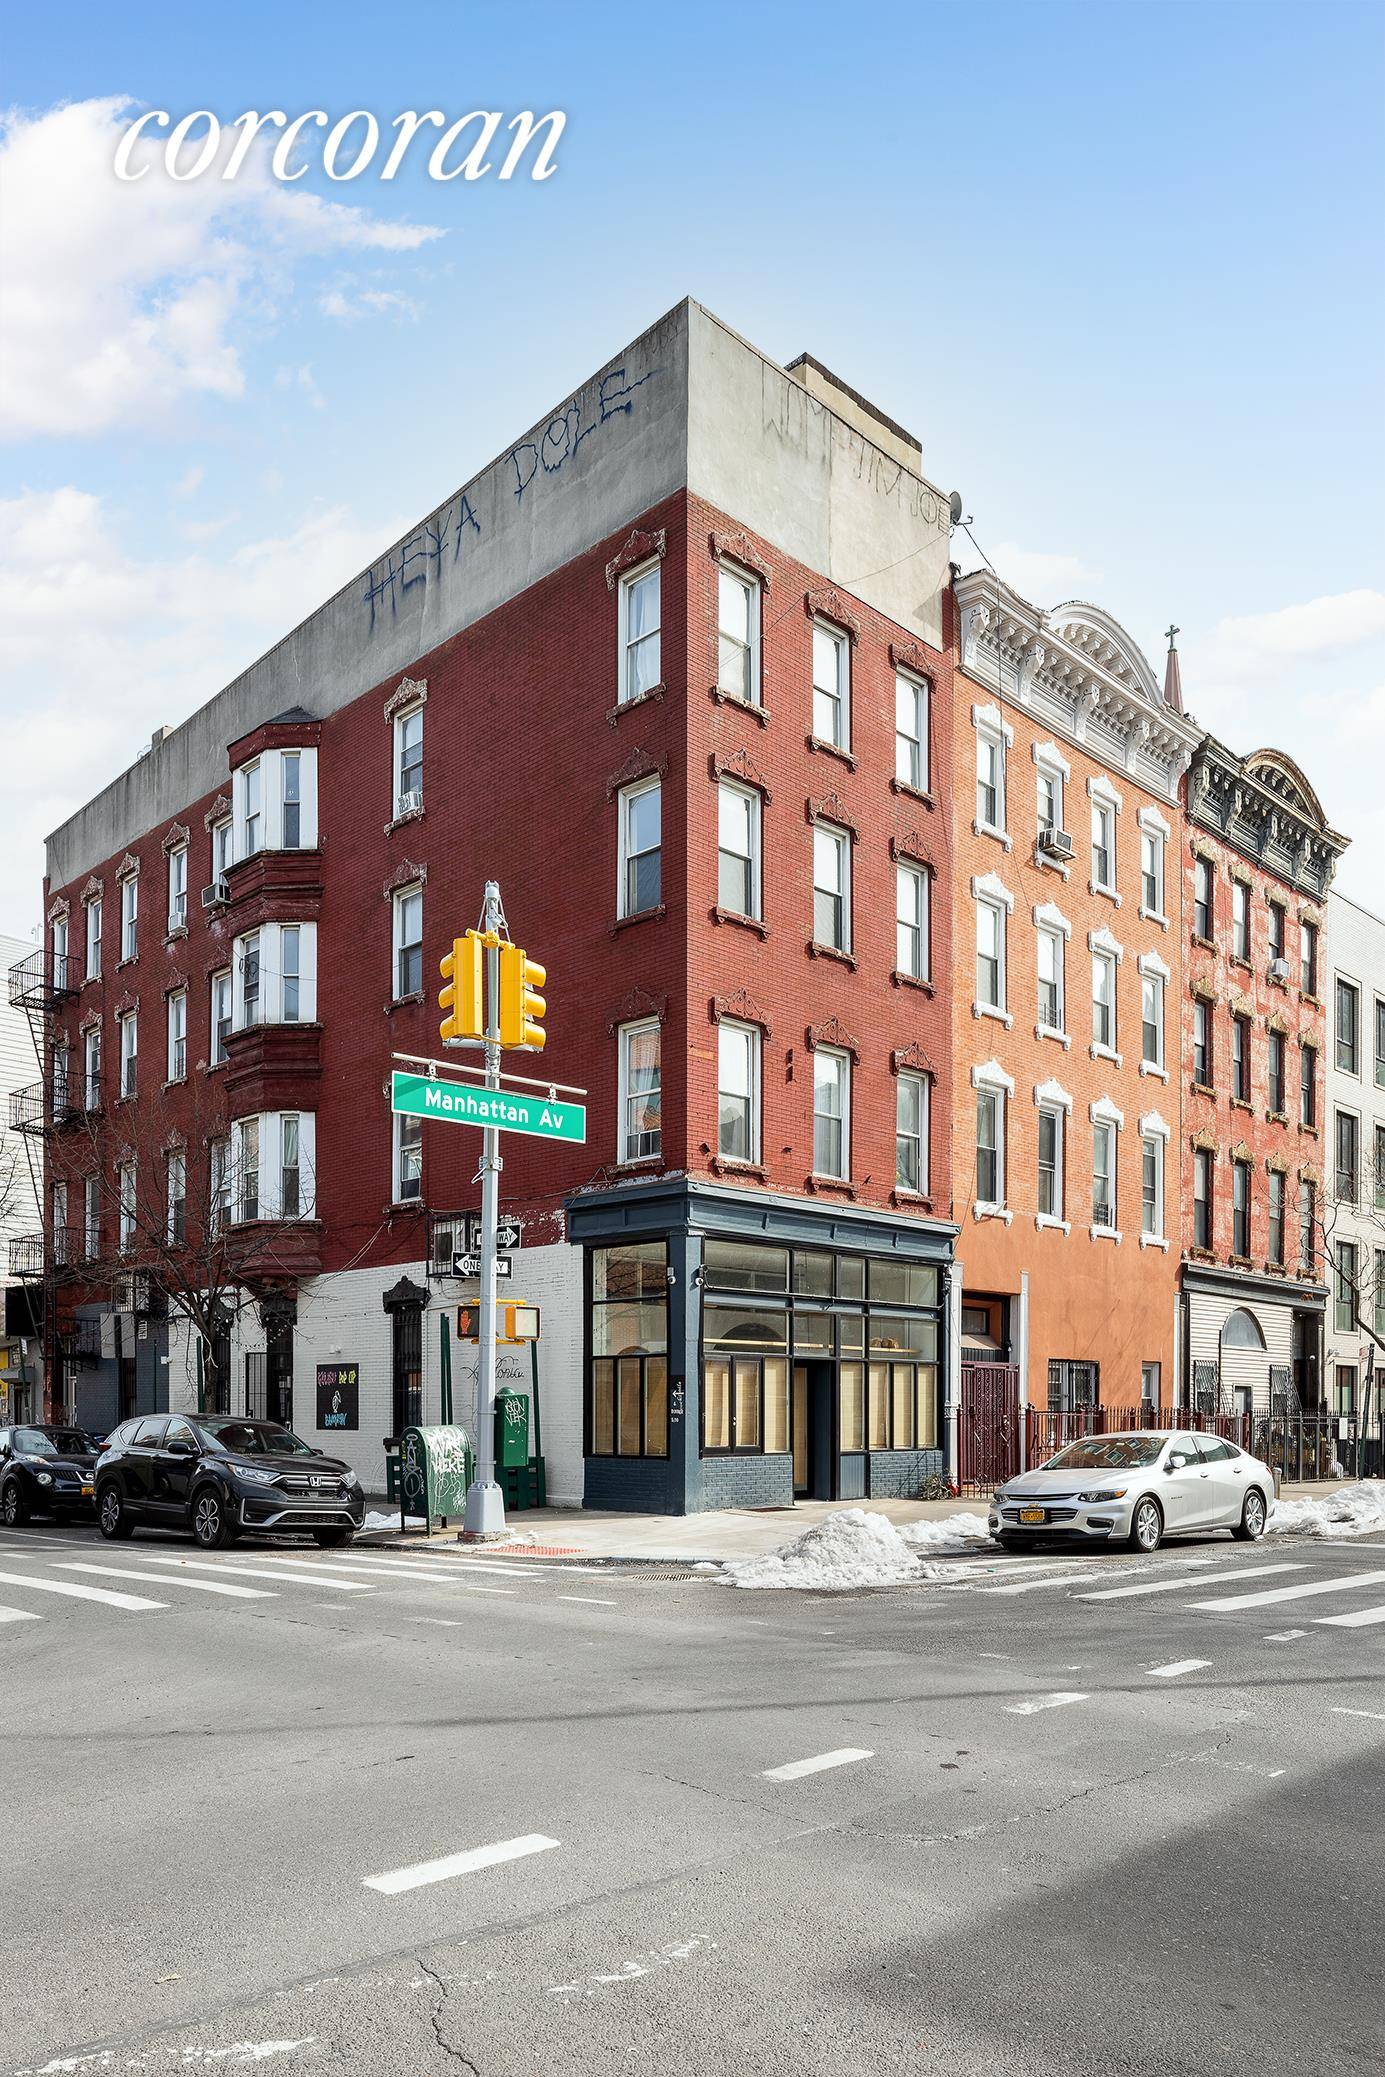 Welcome to 150 Manhattan Avenue A with soaring ceiling heights, charming details and functional layouts, this loft building is desirable for both, end user and an incredible investment opportunity.